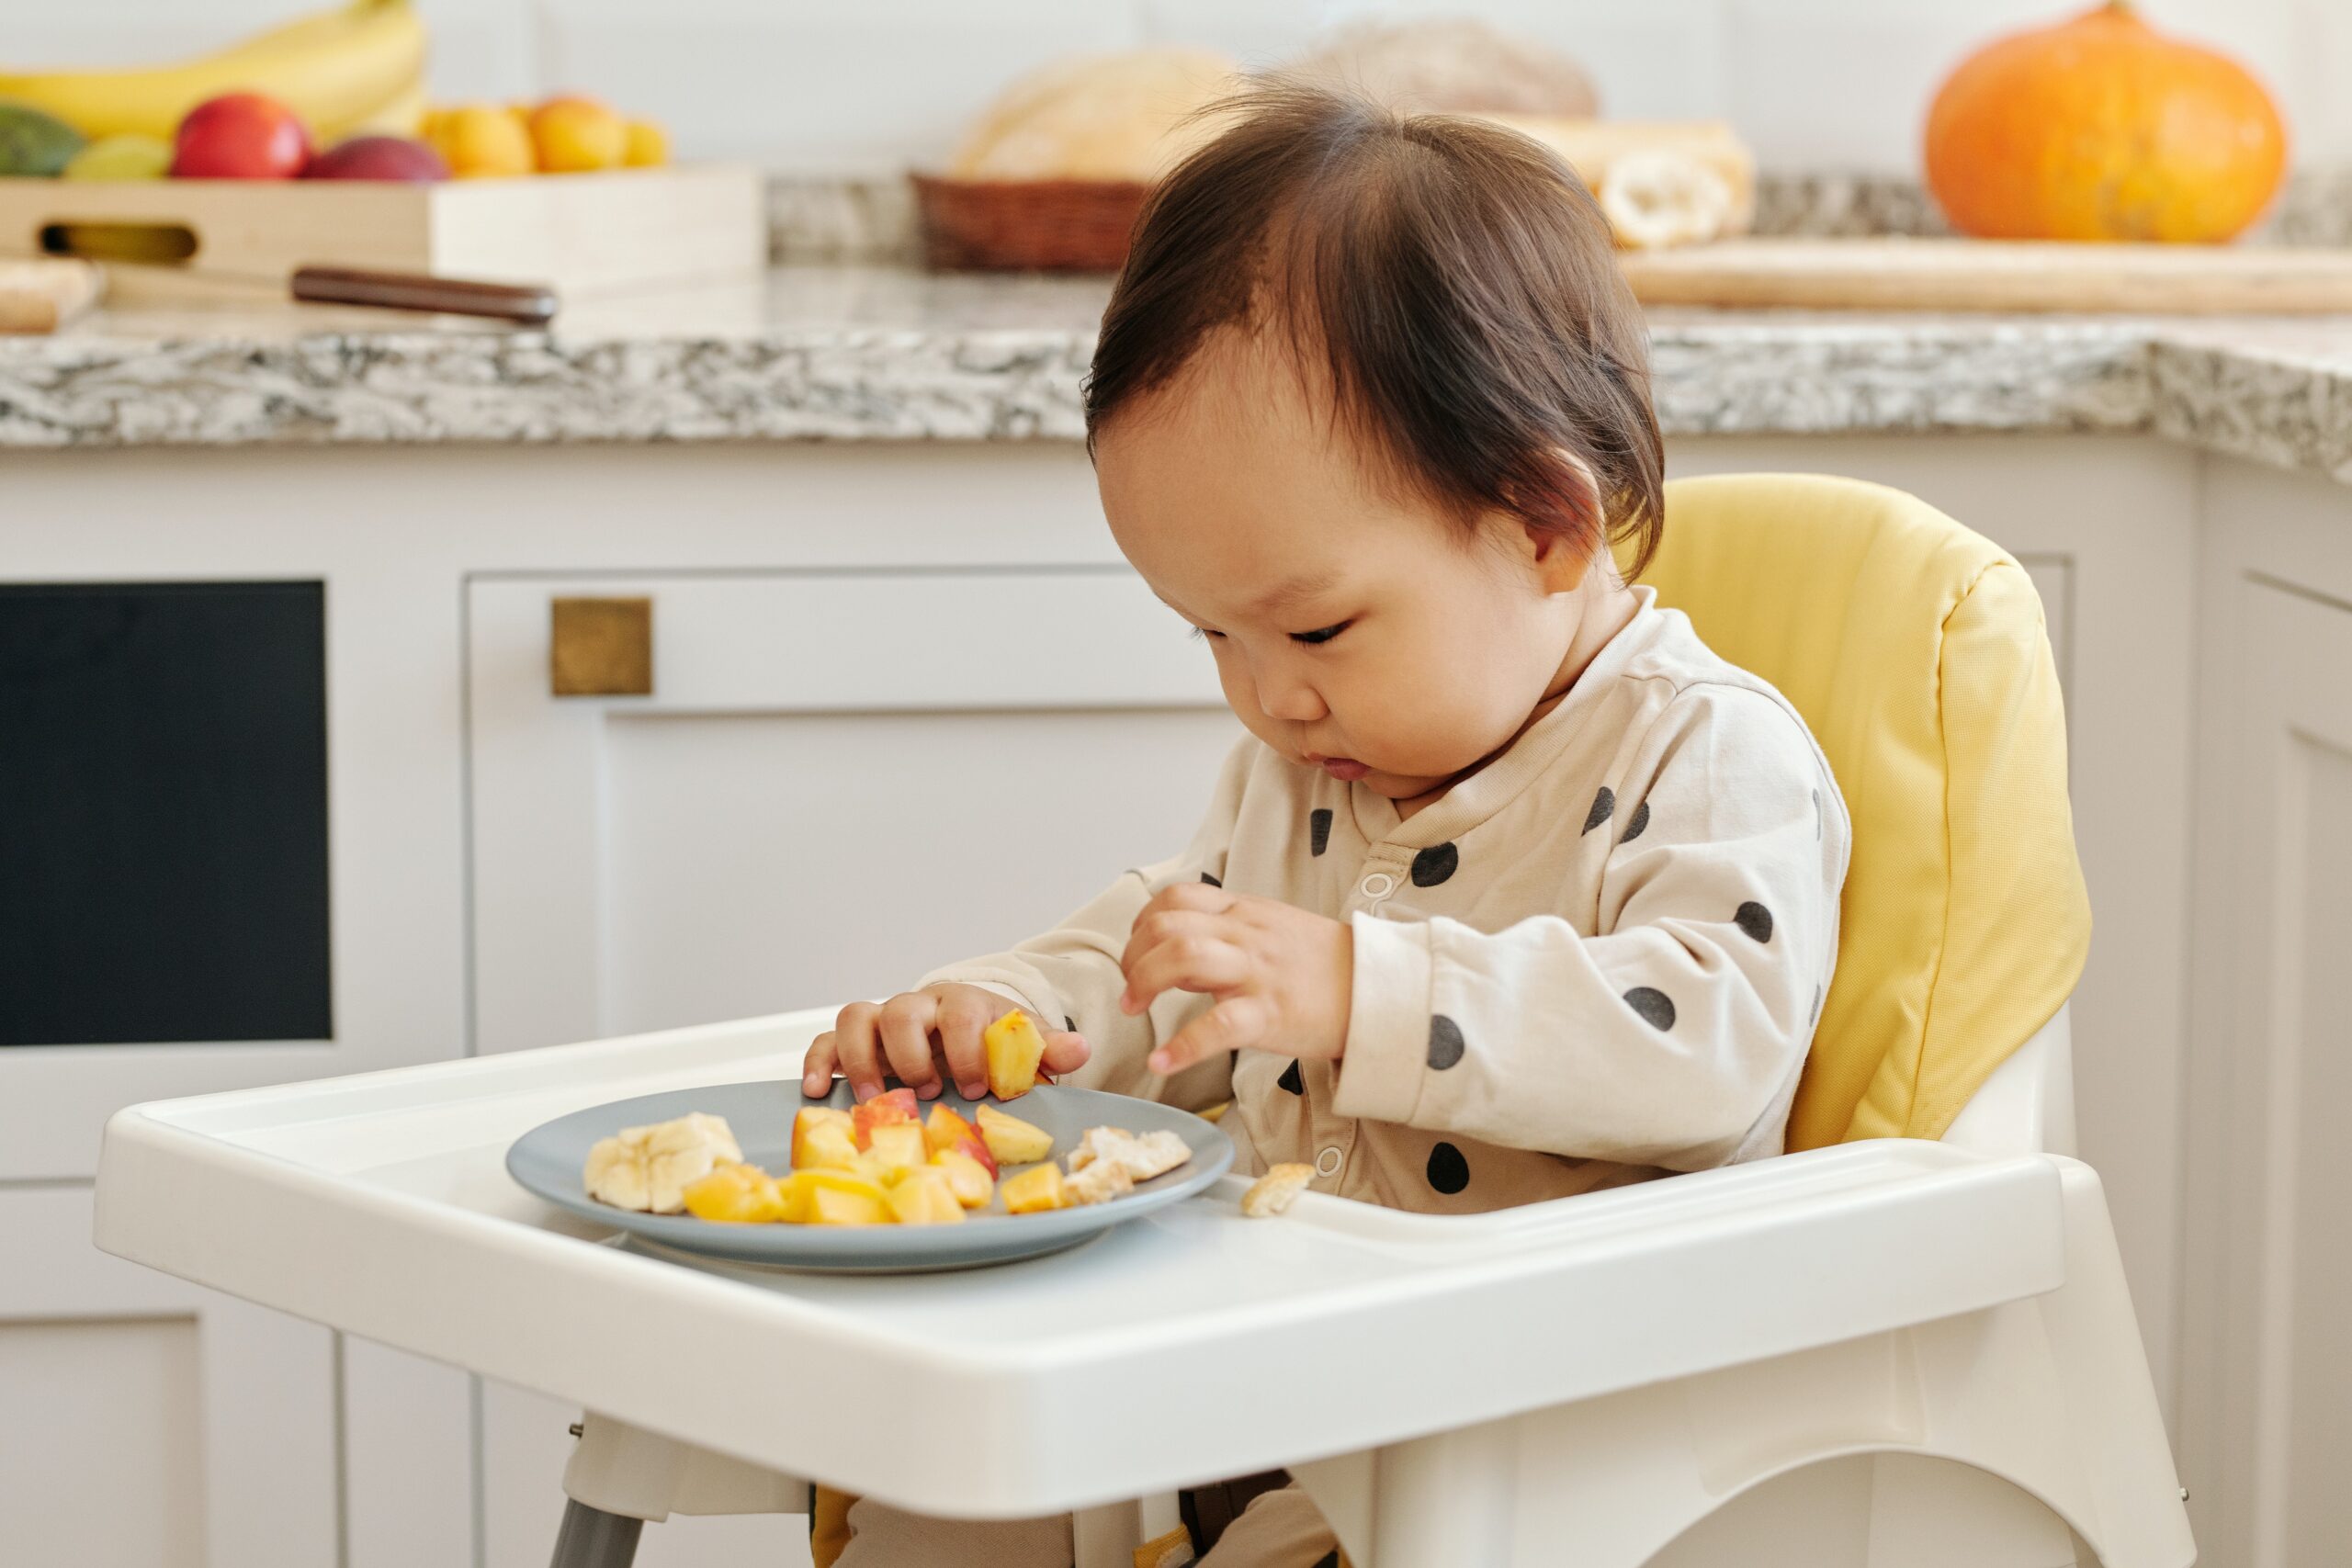 What is Baby-led weaning?